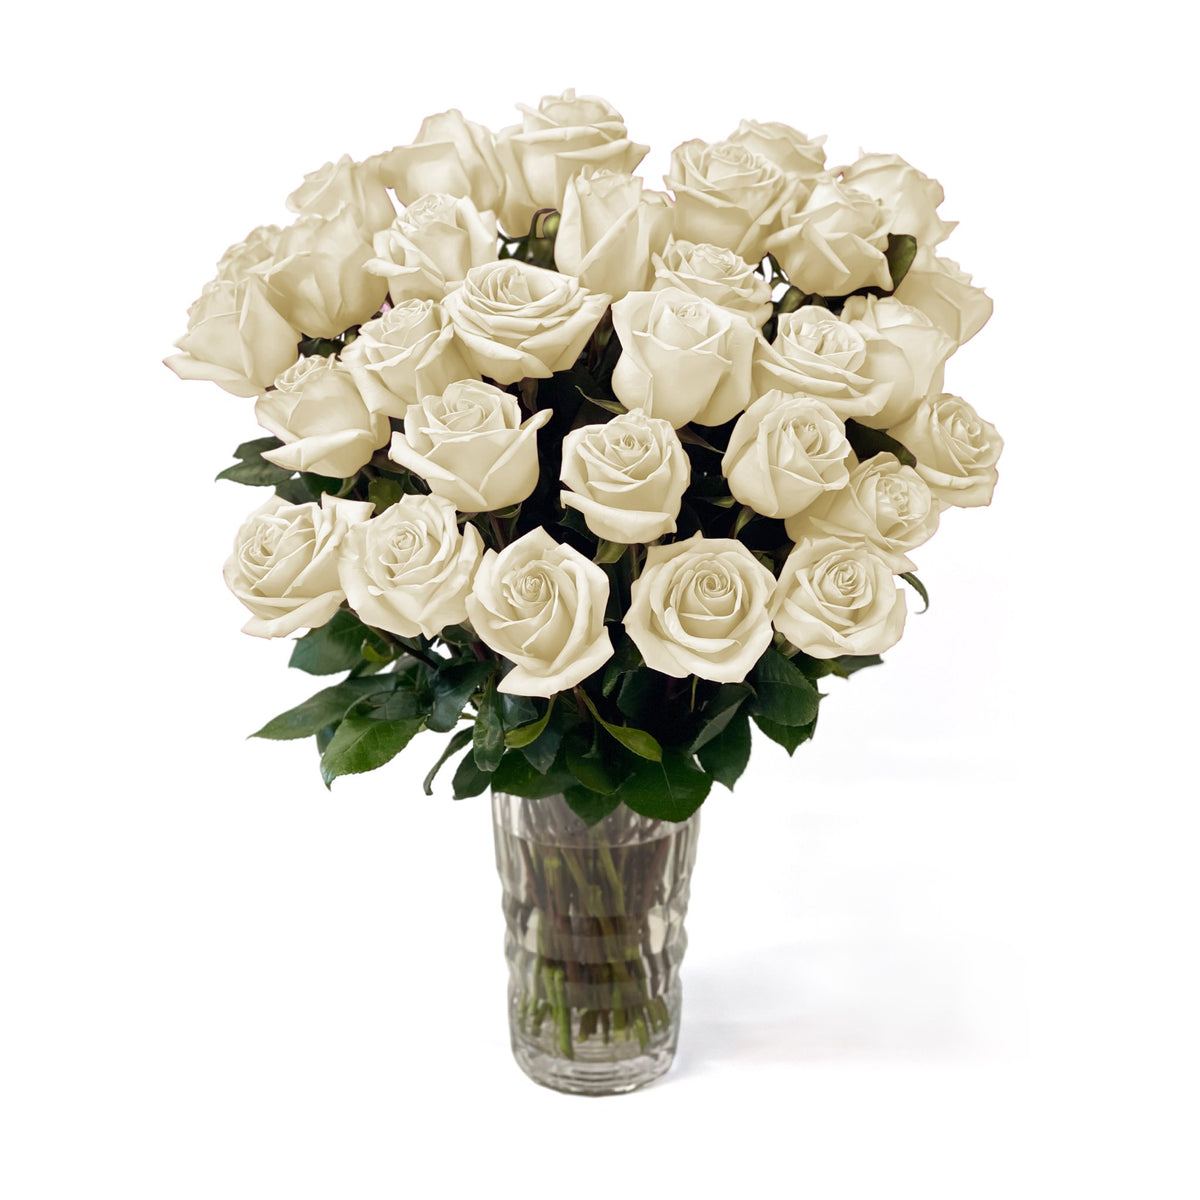 NYC Flower Delivery - Fresh Roses in a Crystal Vase | White - Roses